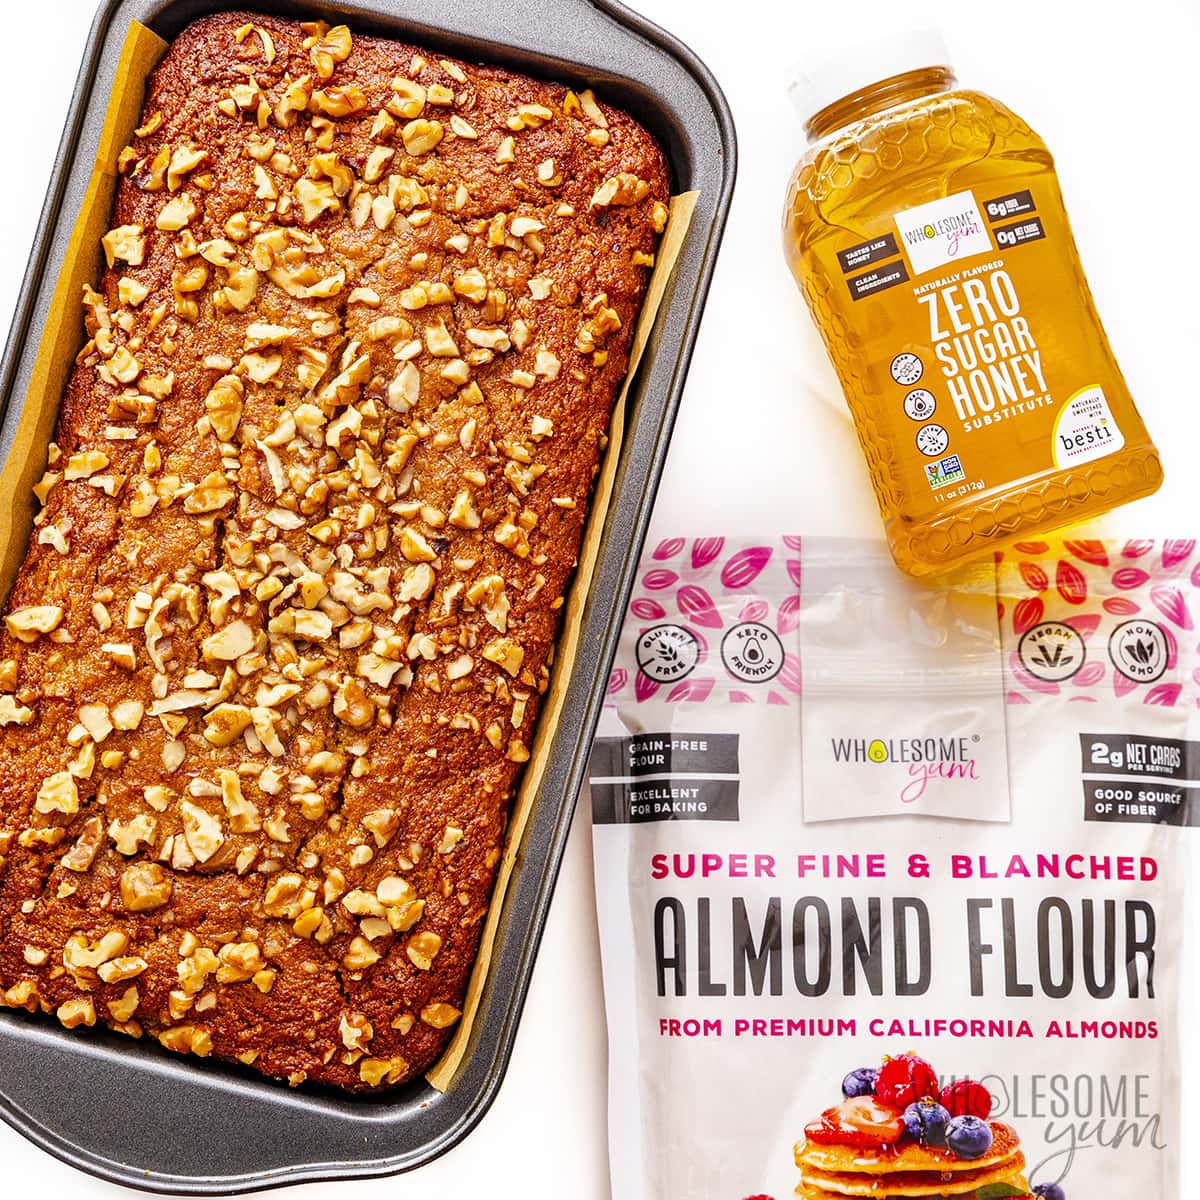 Gluten-free banana bread with a bag of almond flour and a bottle of zero-sugar honey.